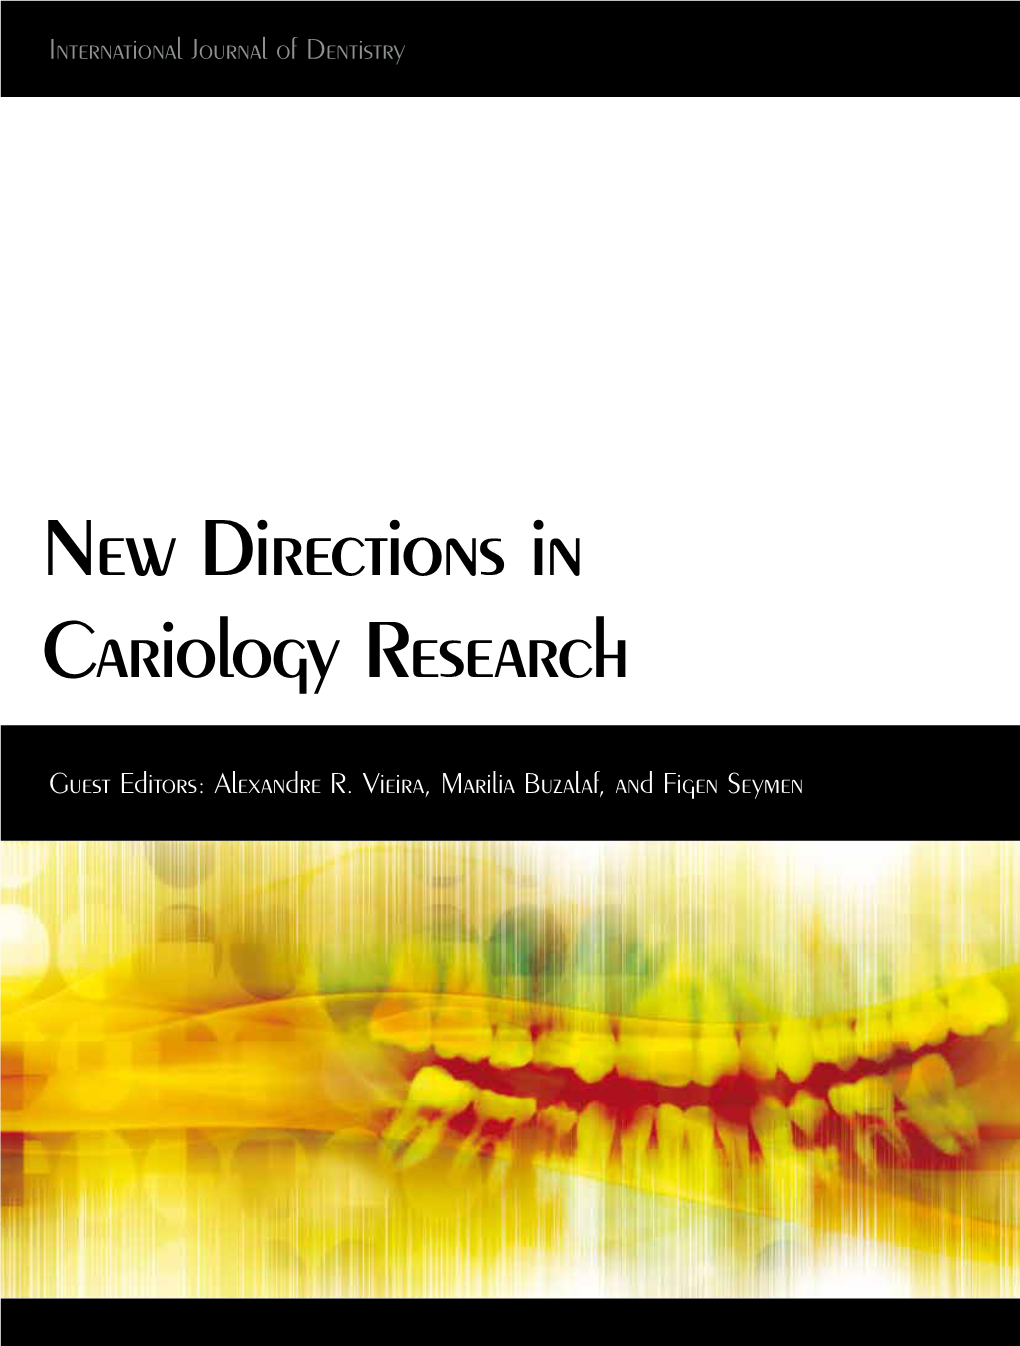 New Directions in Cariology Research